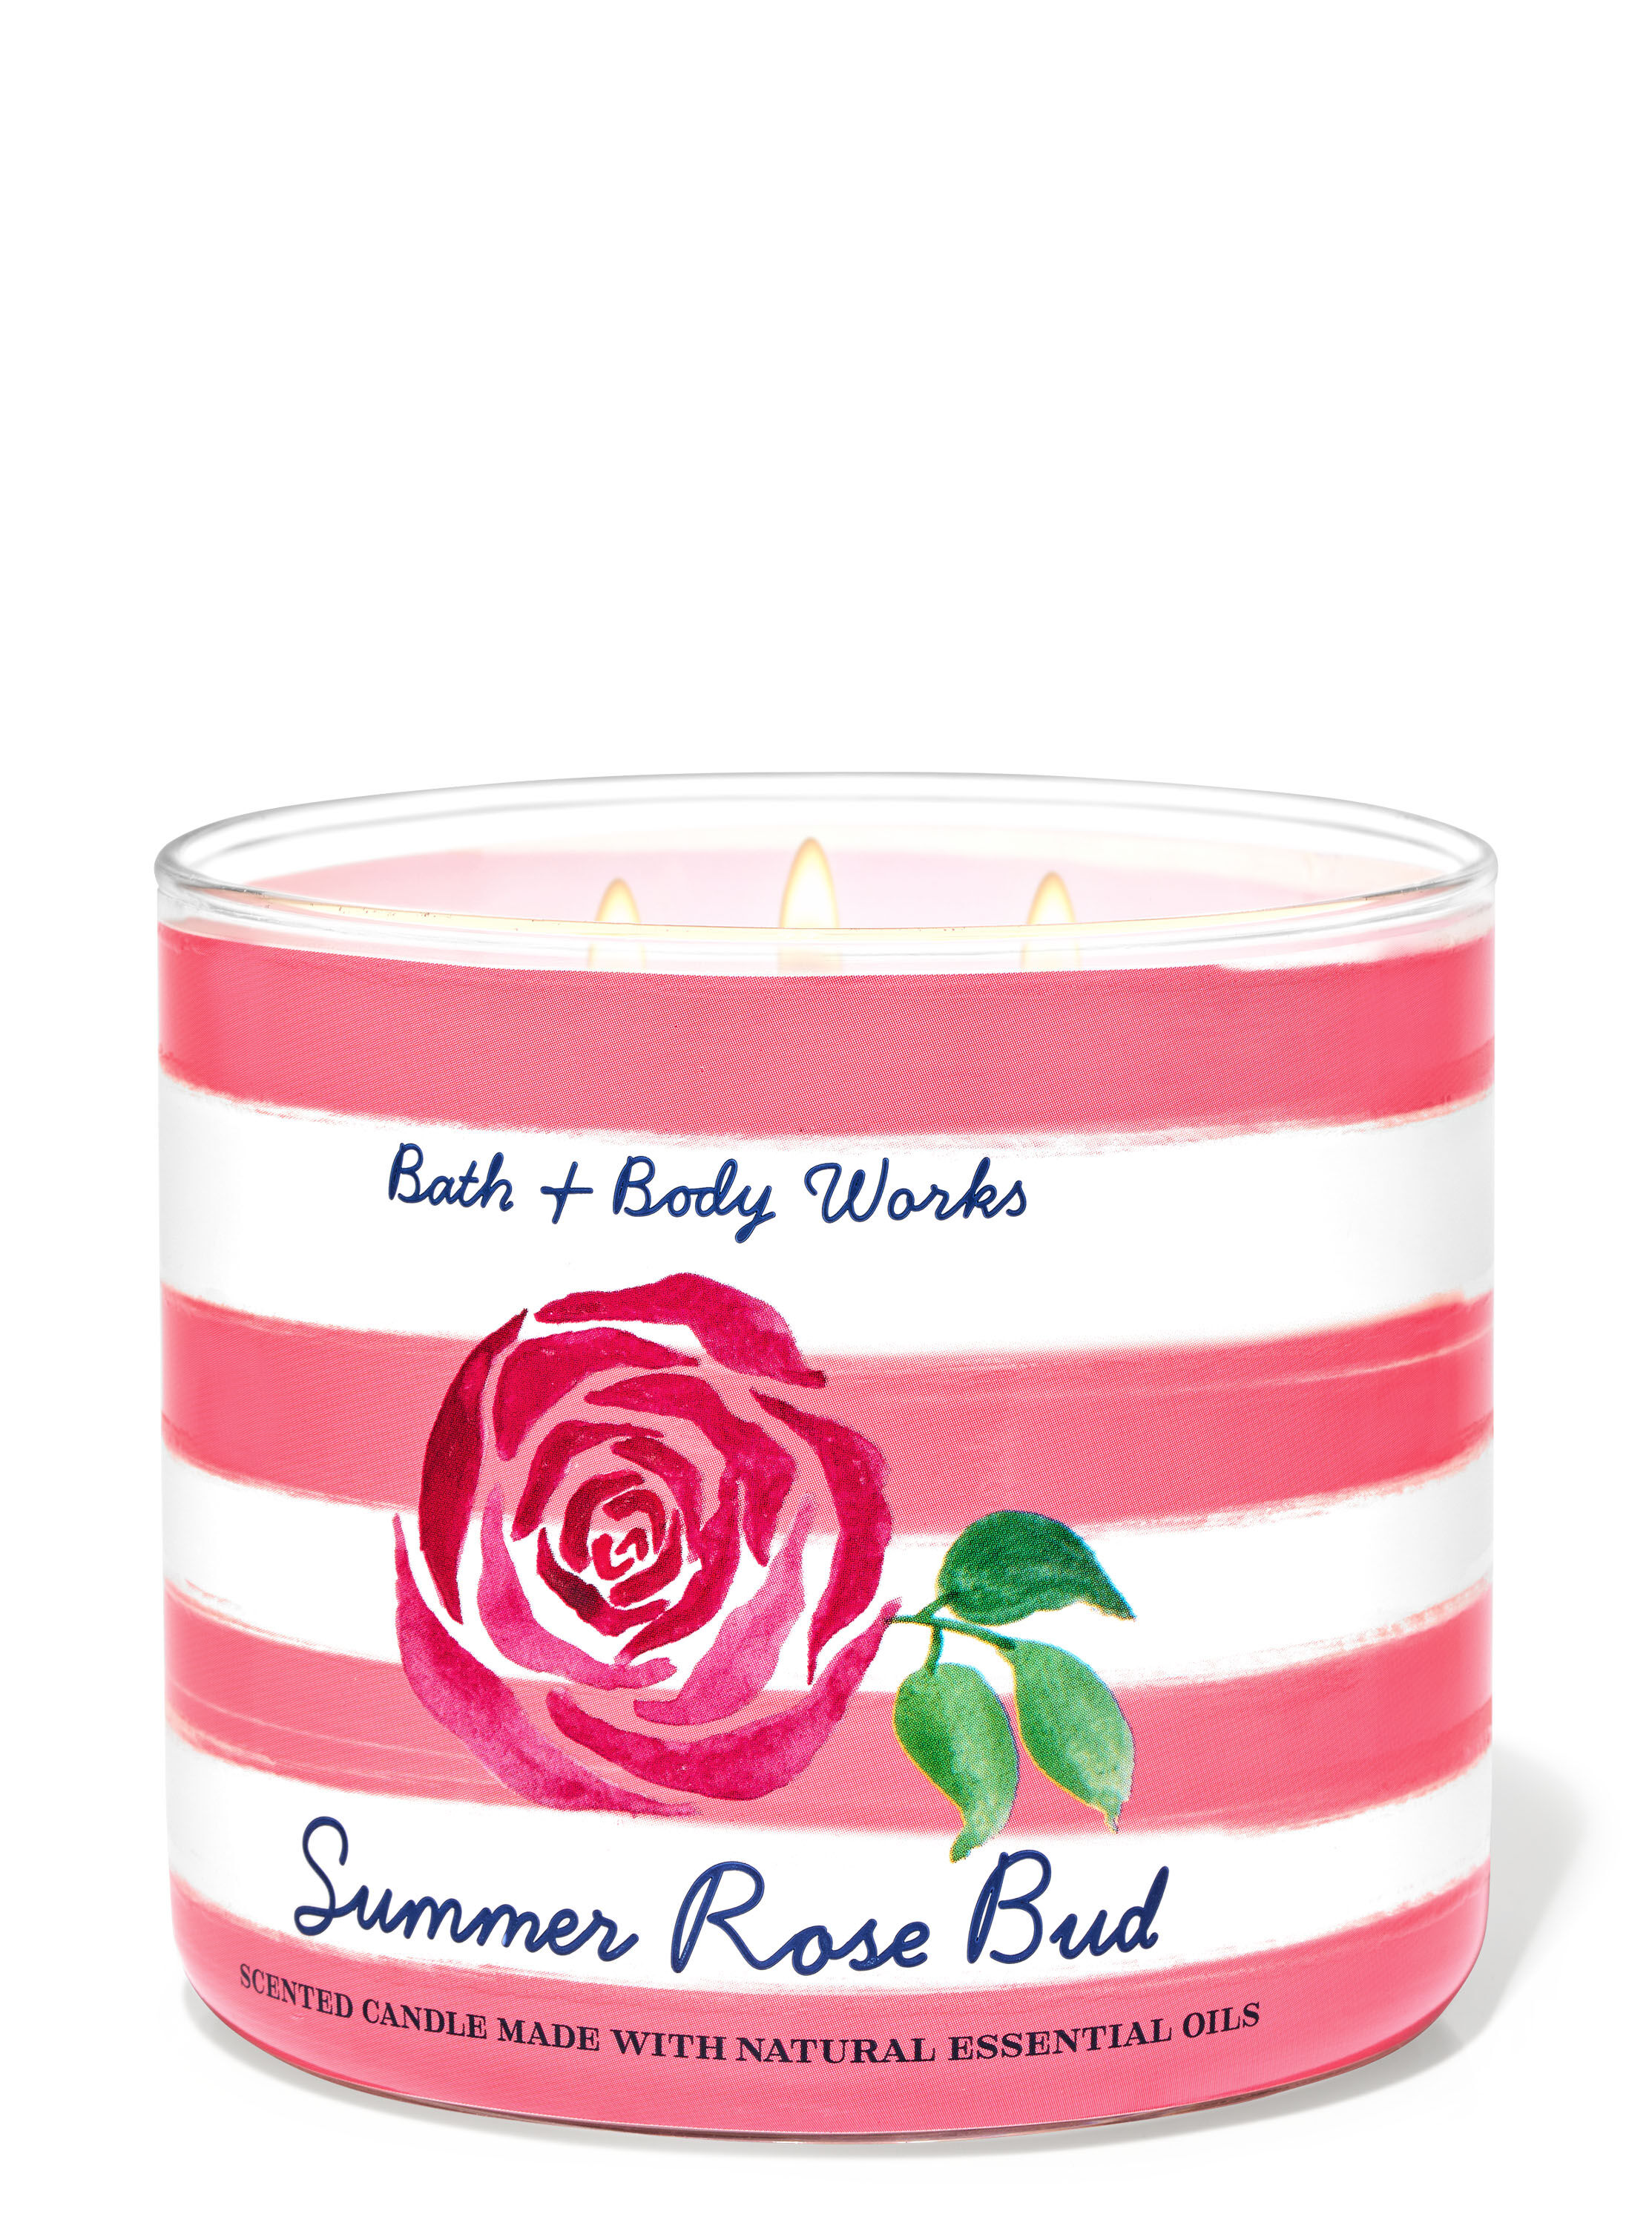 Summer Rose Bud 3-Wick Candle